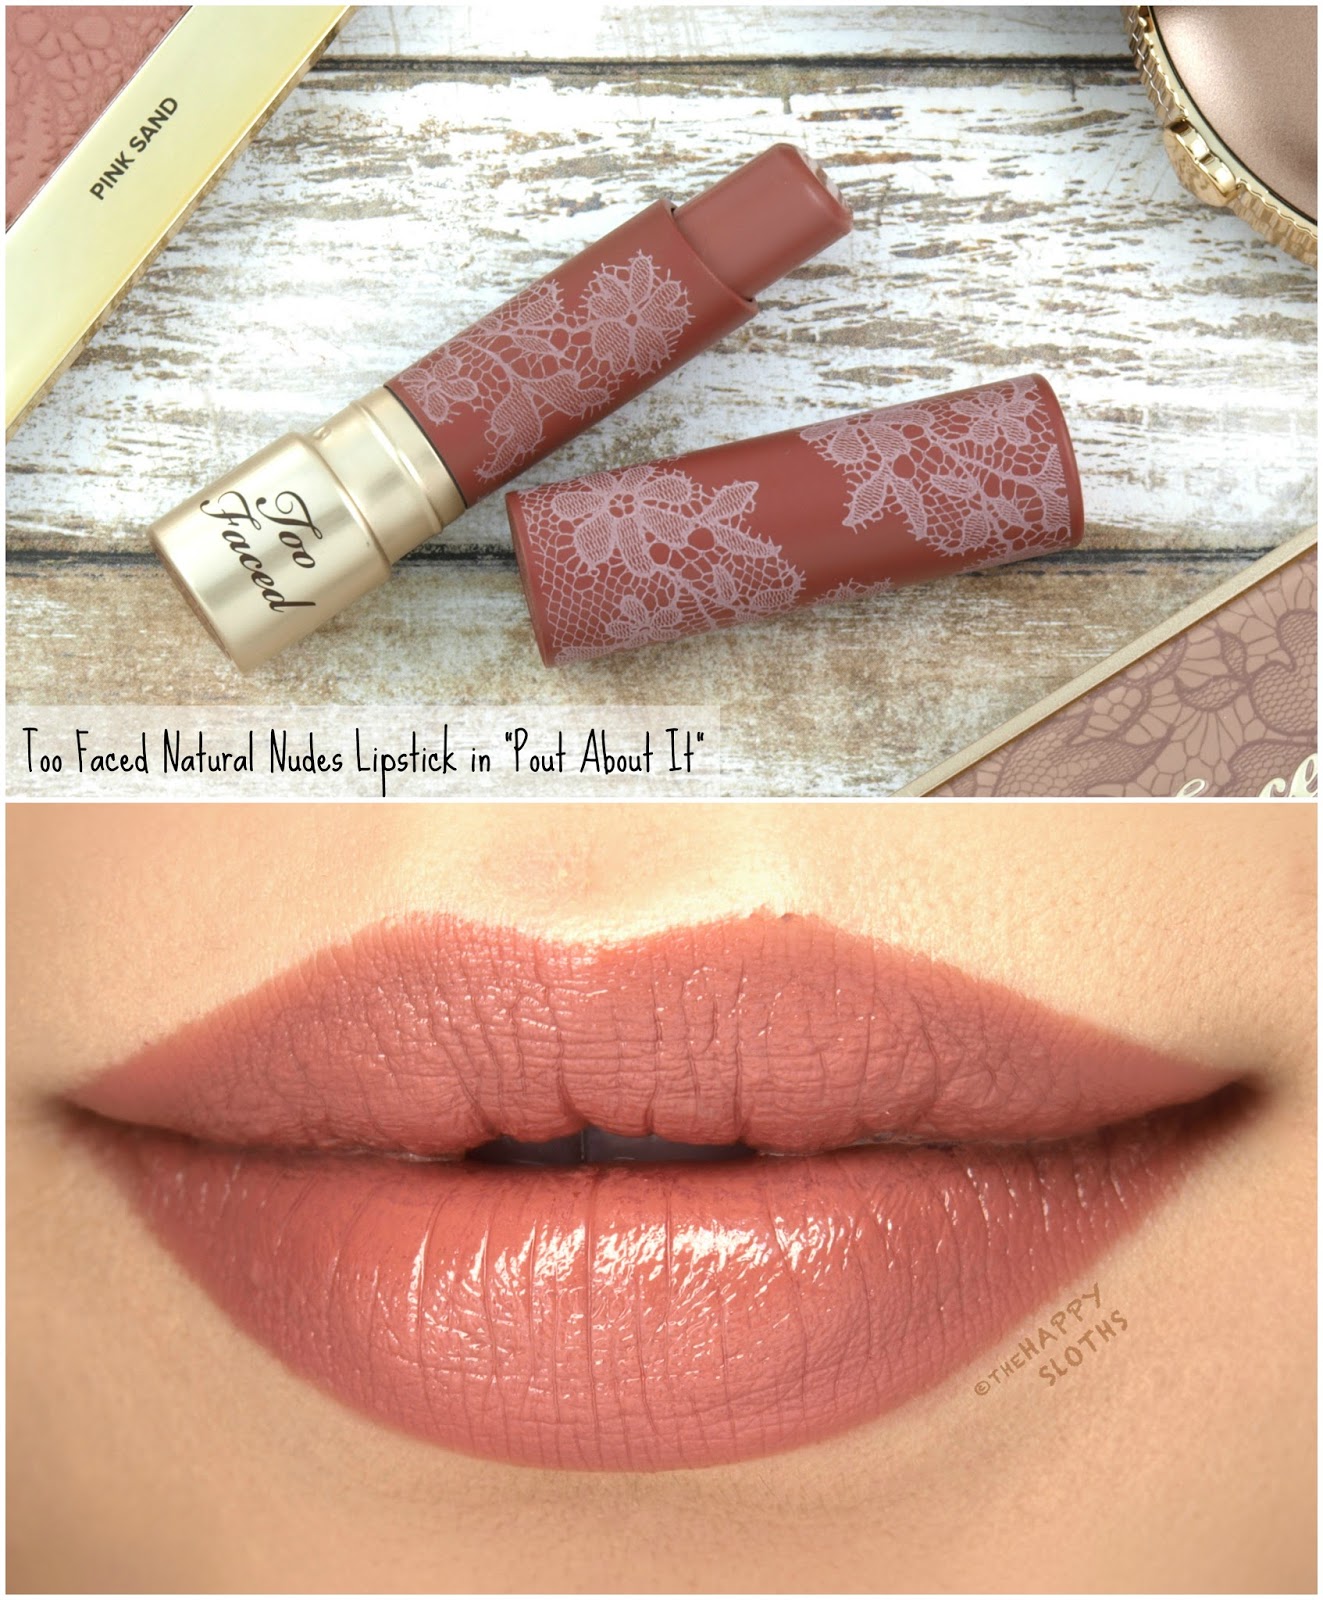 Too Faced | Natural Nudes Lipstick in "Pout About It": Review and Swatches